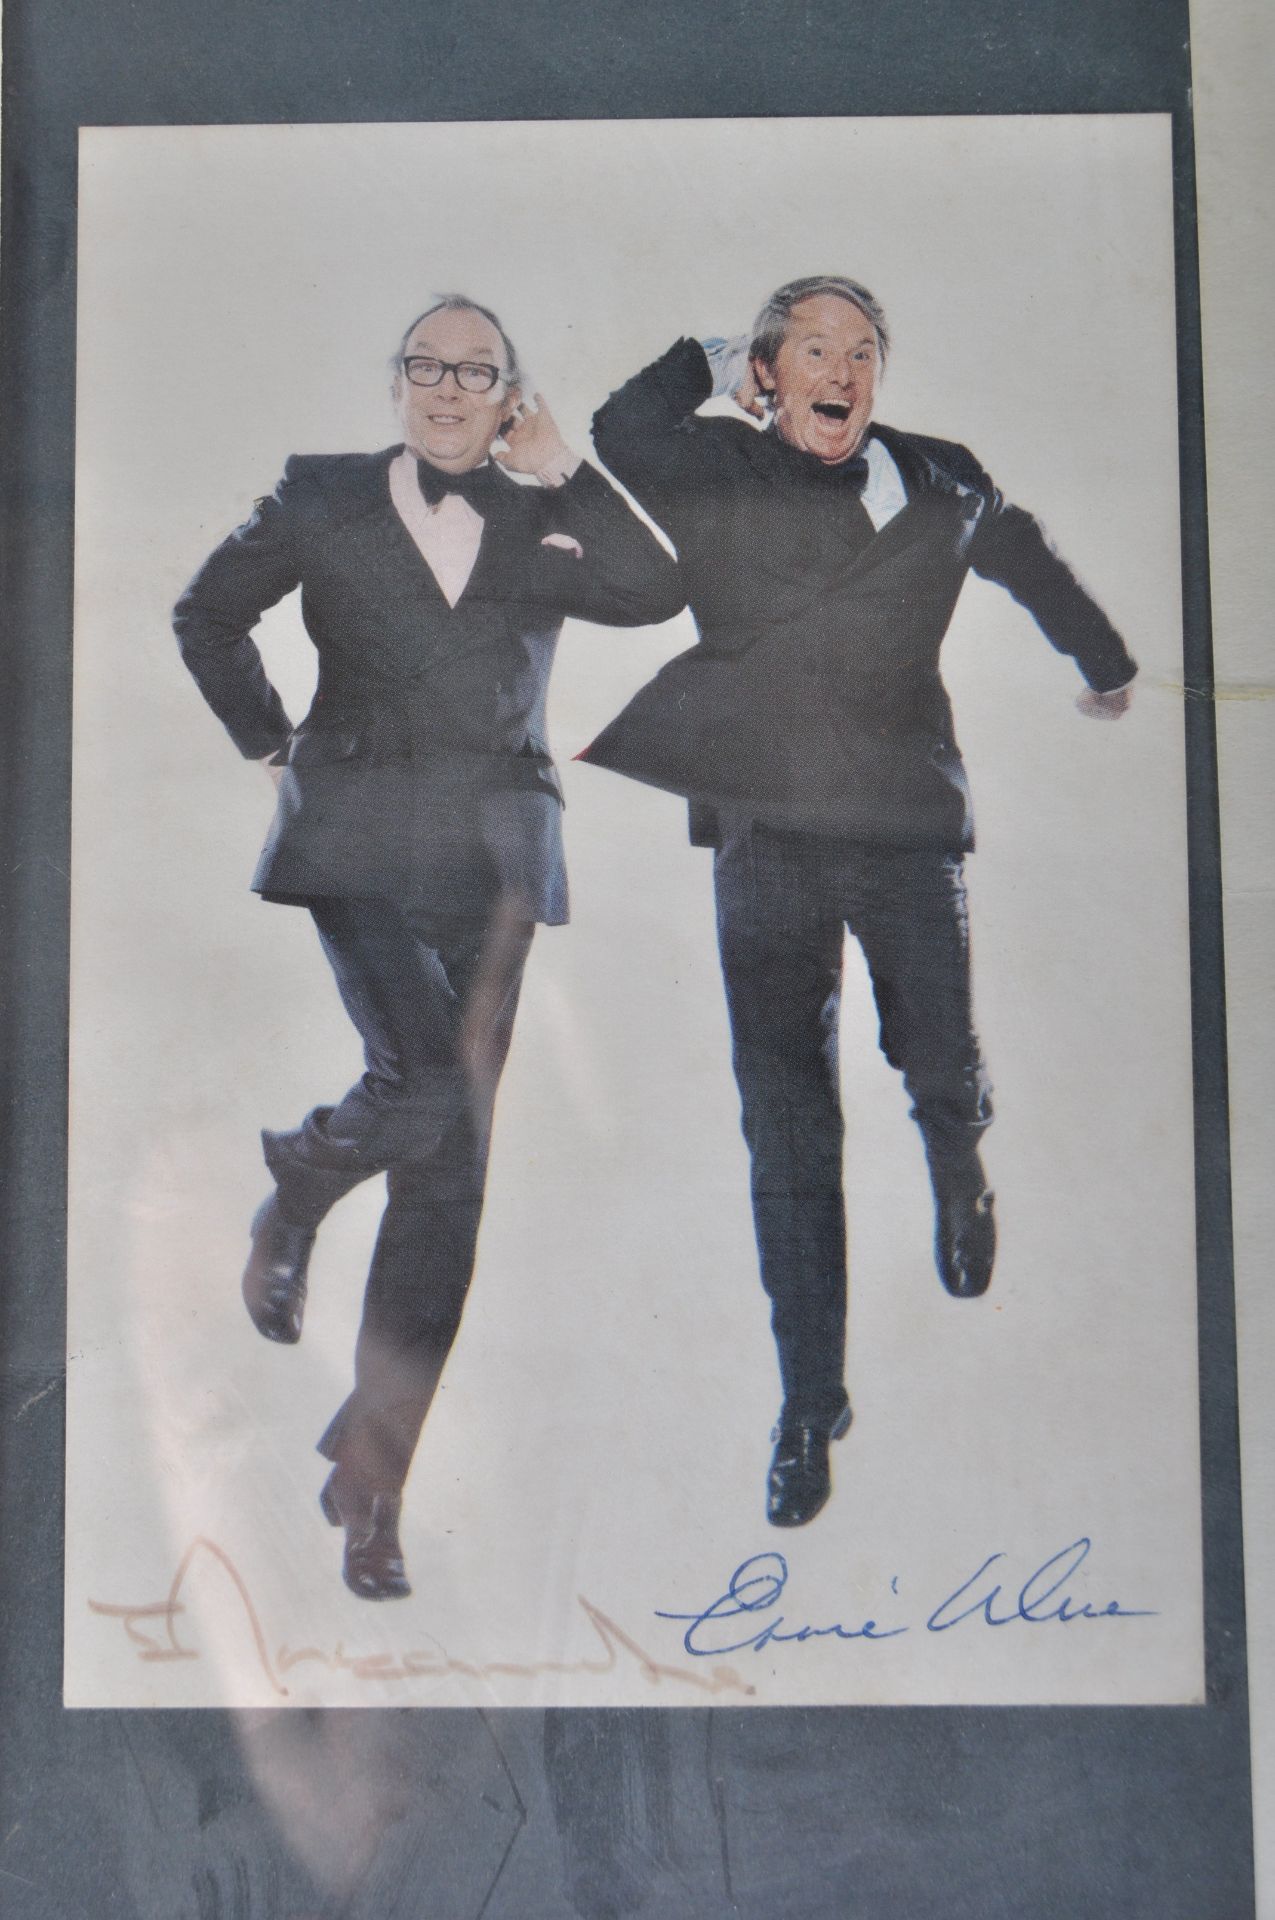 MORECAMBE & WISE - AUTOGRAPHED PHOTOGRAPH & LETTER - Image 3 of 4